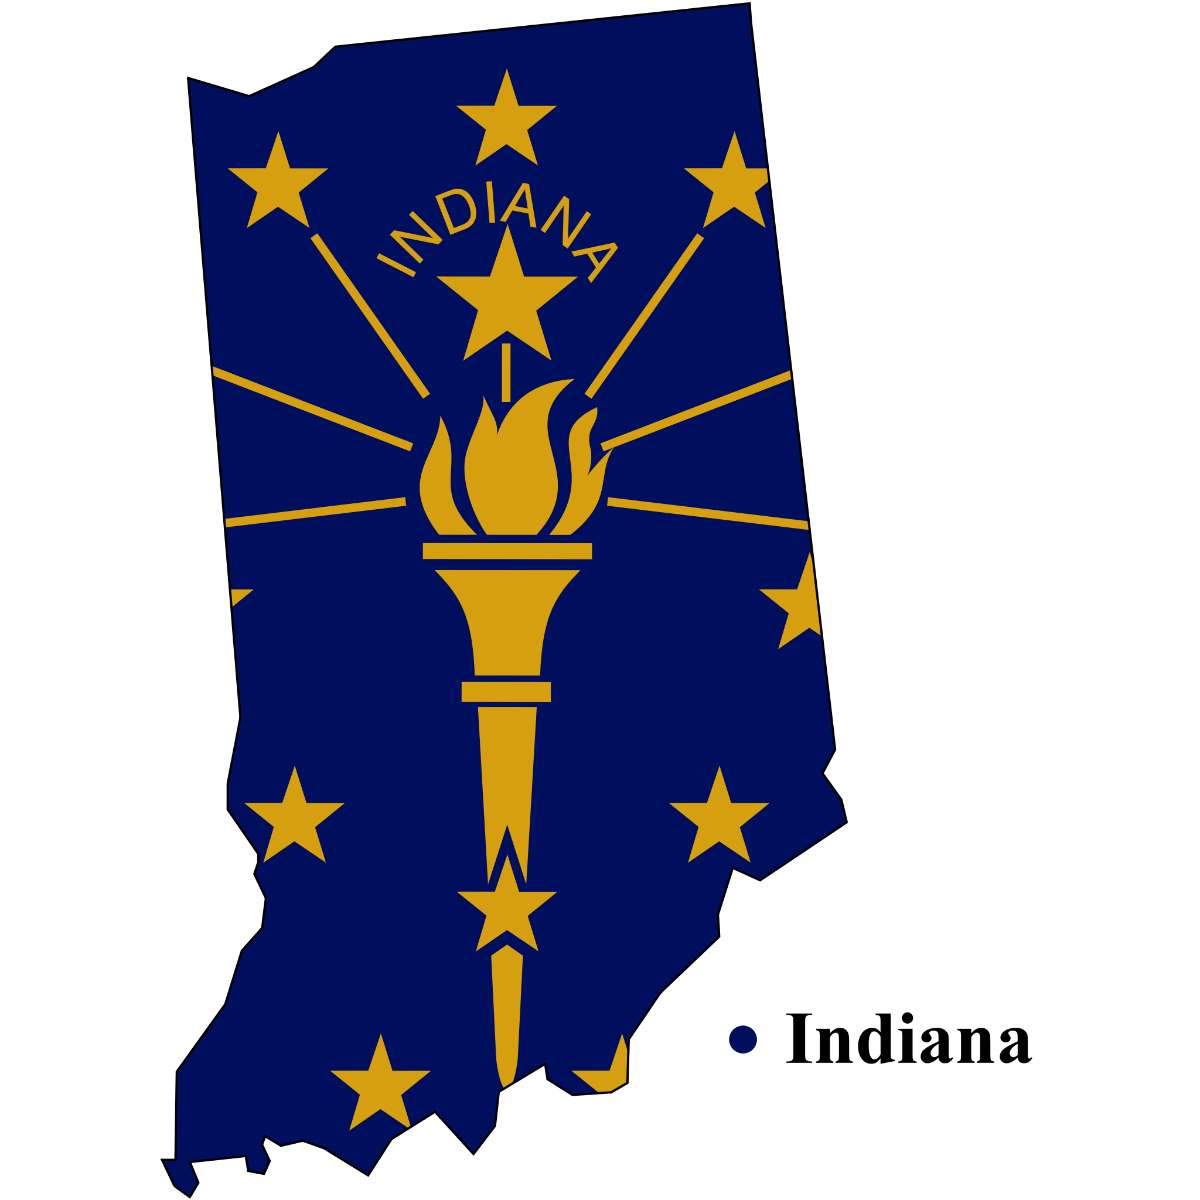 Indiana State map cutout with Indiana flag superimposed